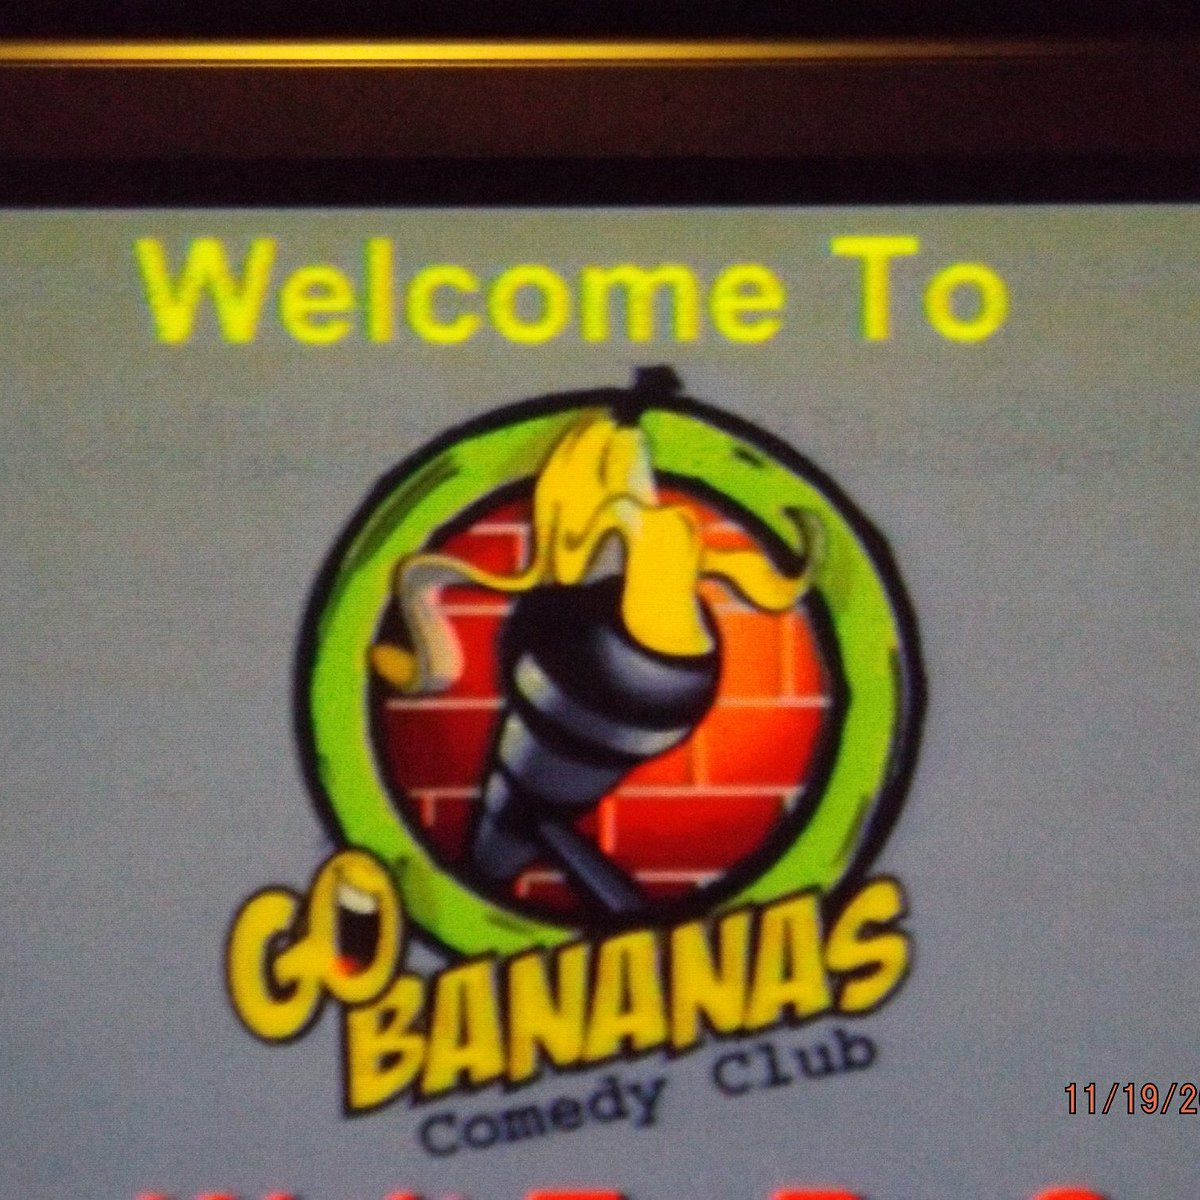 Go Bananas Comedy Club (Montgomery) - All You Need to Know BEFORE You Go